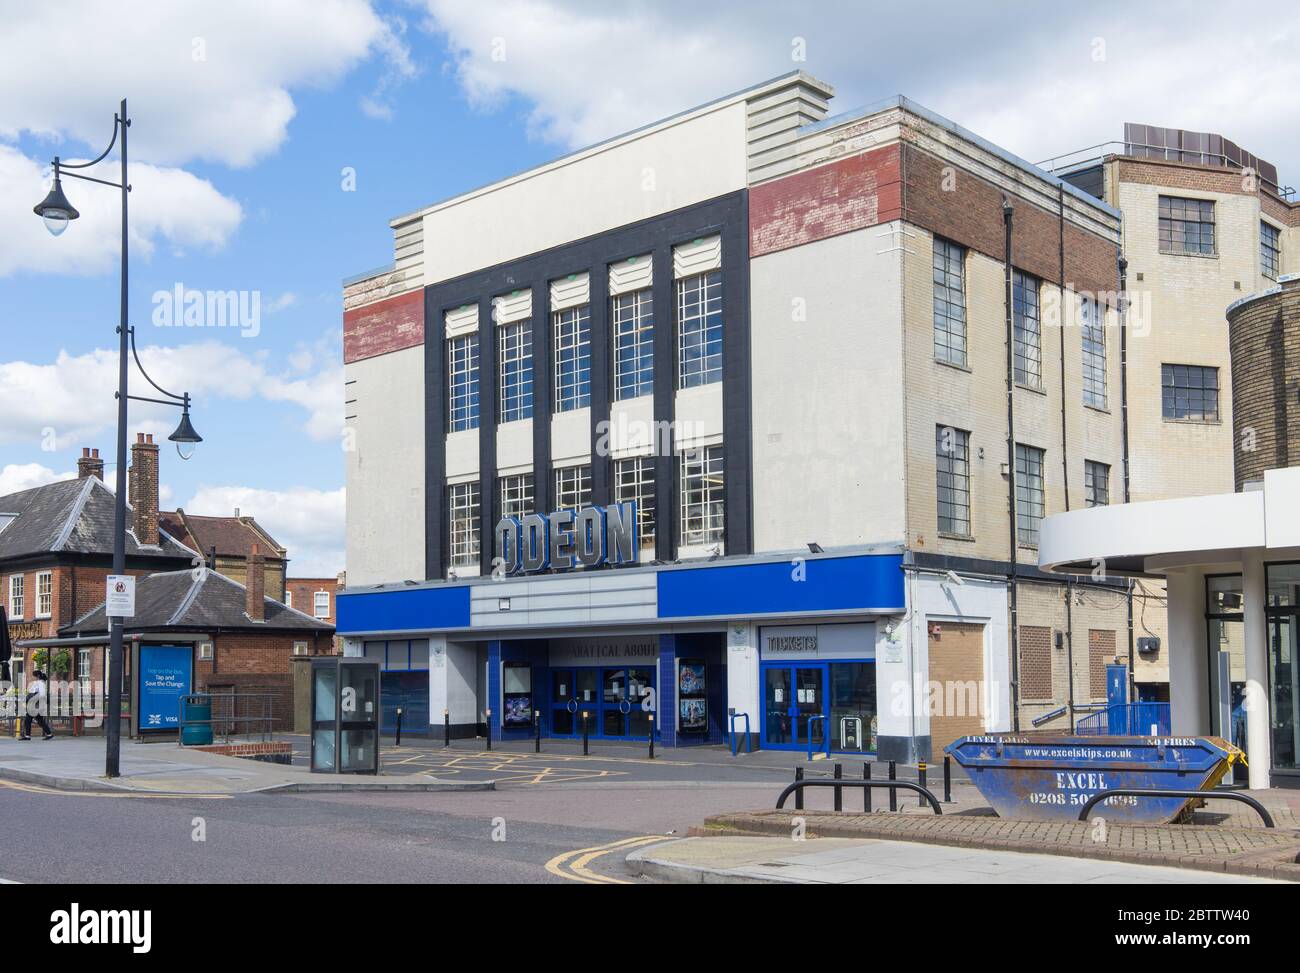 The outside of the Odeon Cinema in South Woodford. Essex, England Stock Photo